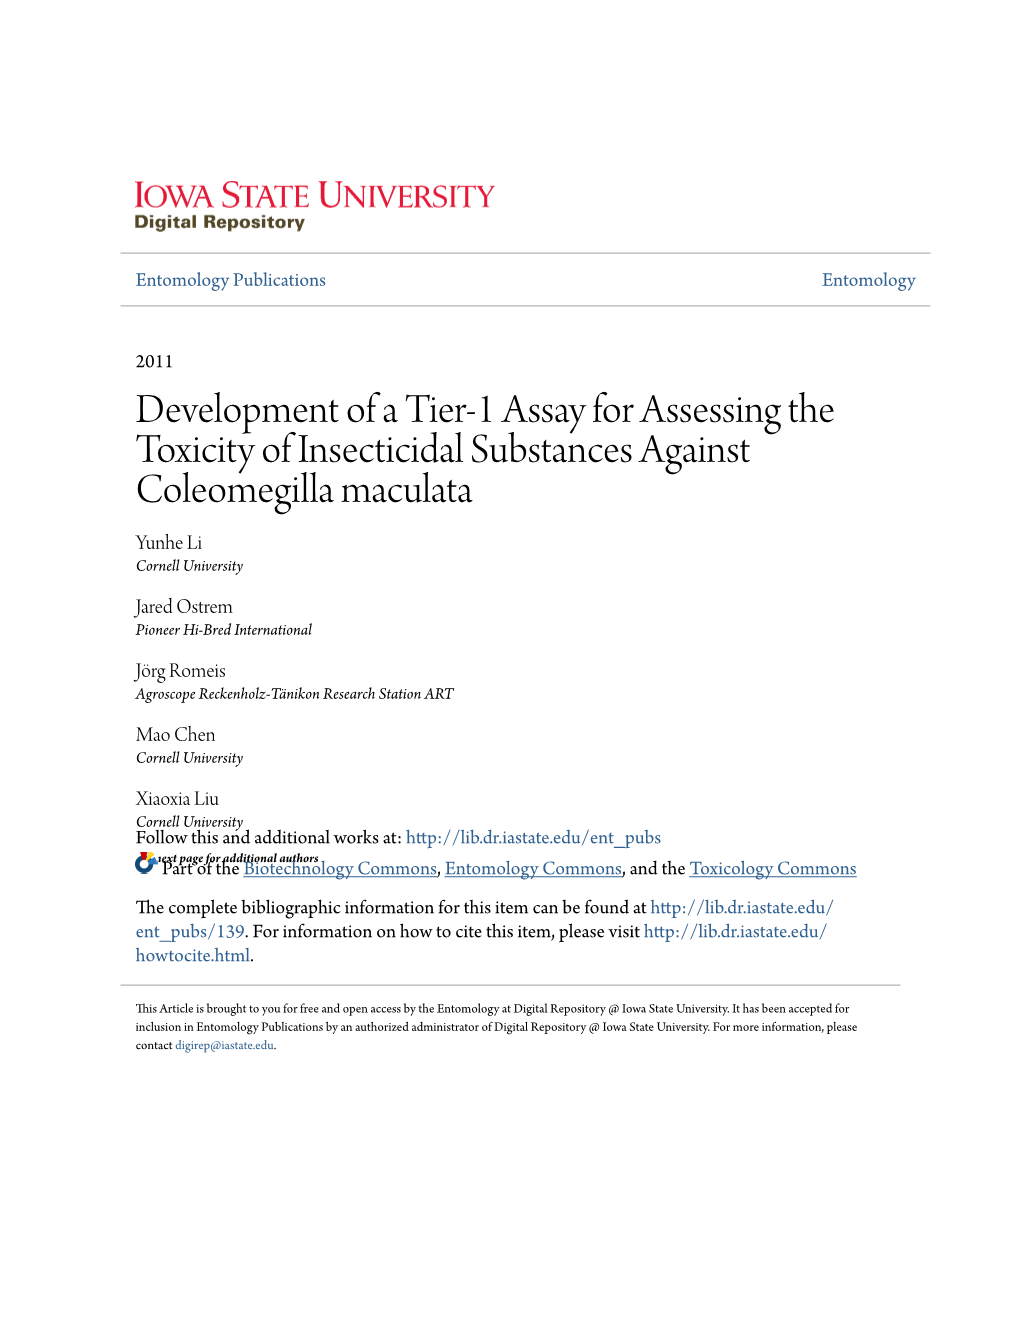 Development of a Tier-1 Assay for Assessing the Toxicity of Insecticidal Substances Against Coleomegilla Maculata Yunhe Li Cornell University